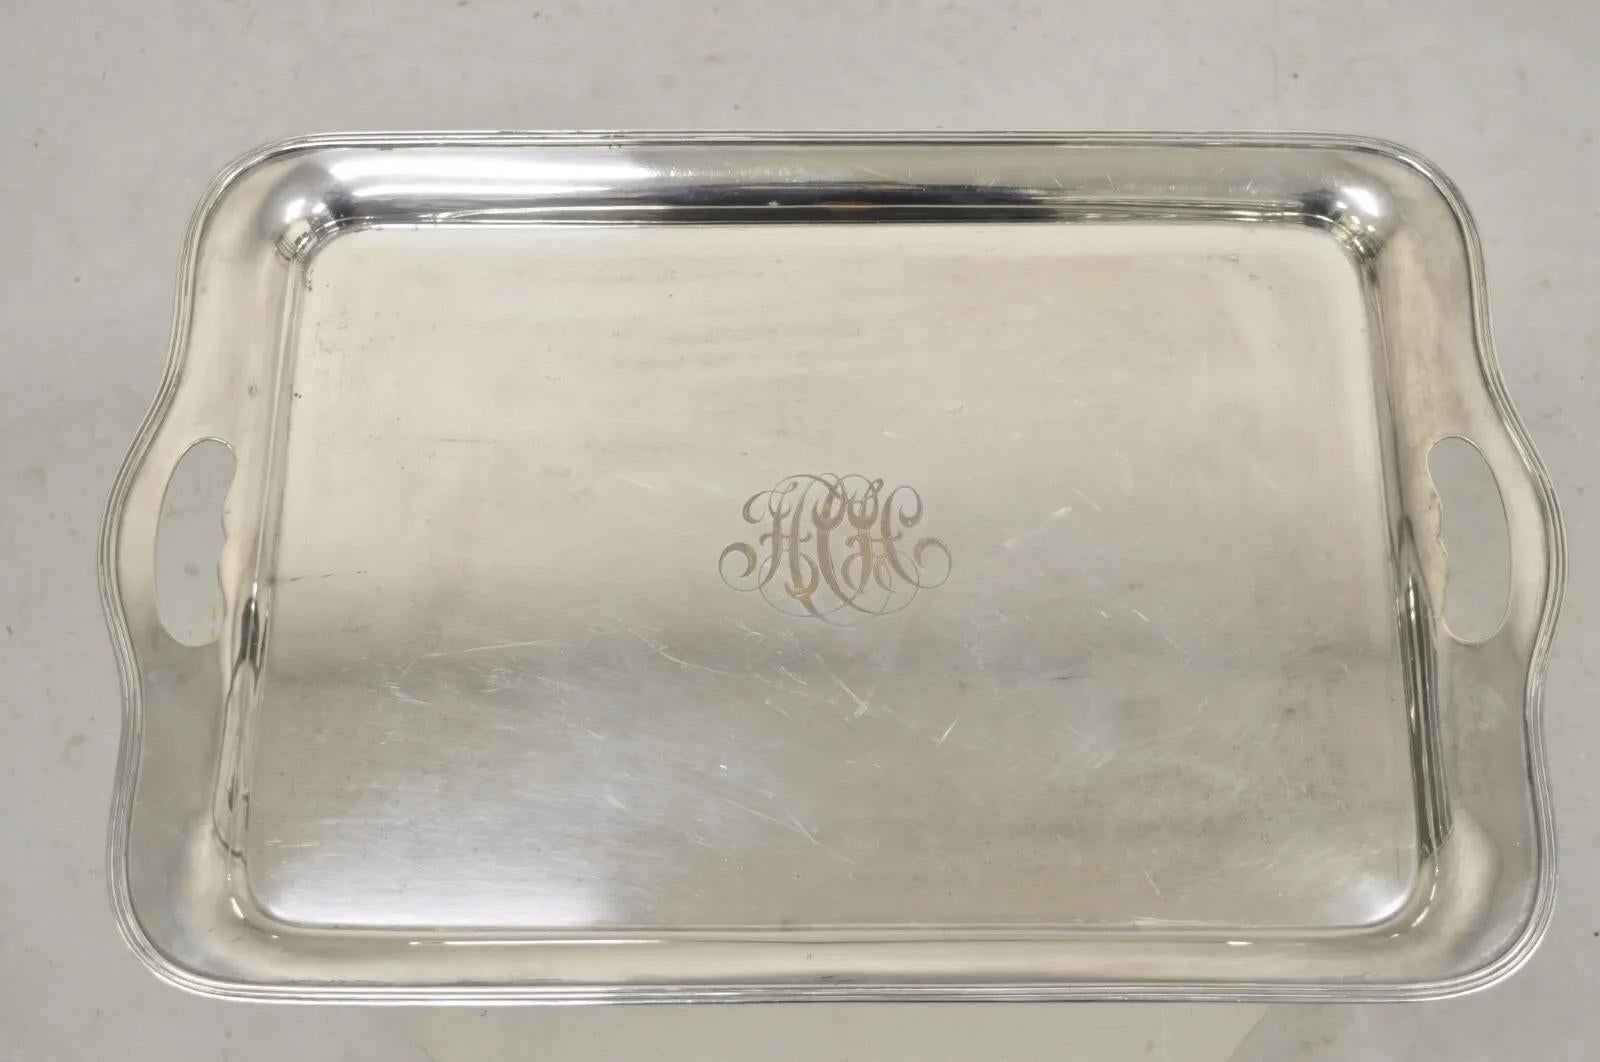 Antique GM Co English Edwardian Silver Plated Twin Handle Serving Platter Tray. Item features illegible monogram to center, original hallmark, very nice antique tray. Circa Early 1900s. Measurements: 1